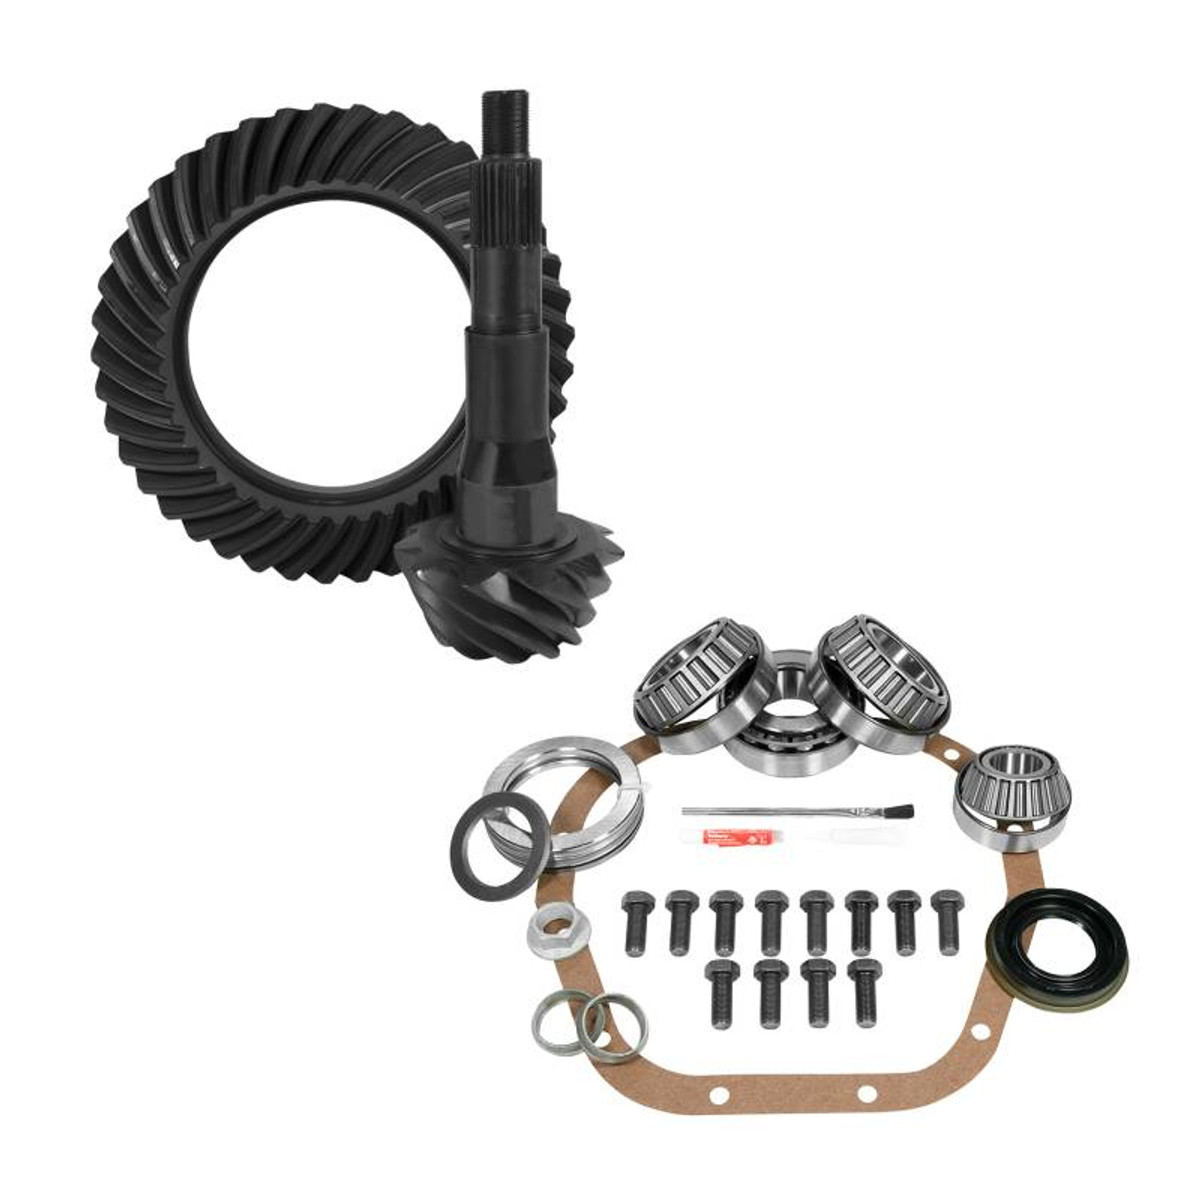 10.5 inch Ford 4.56 Rear Ring and Pinion Install Kit YGK2138